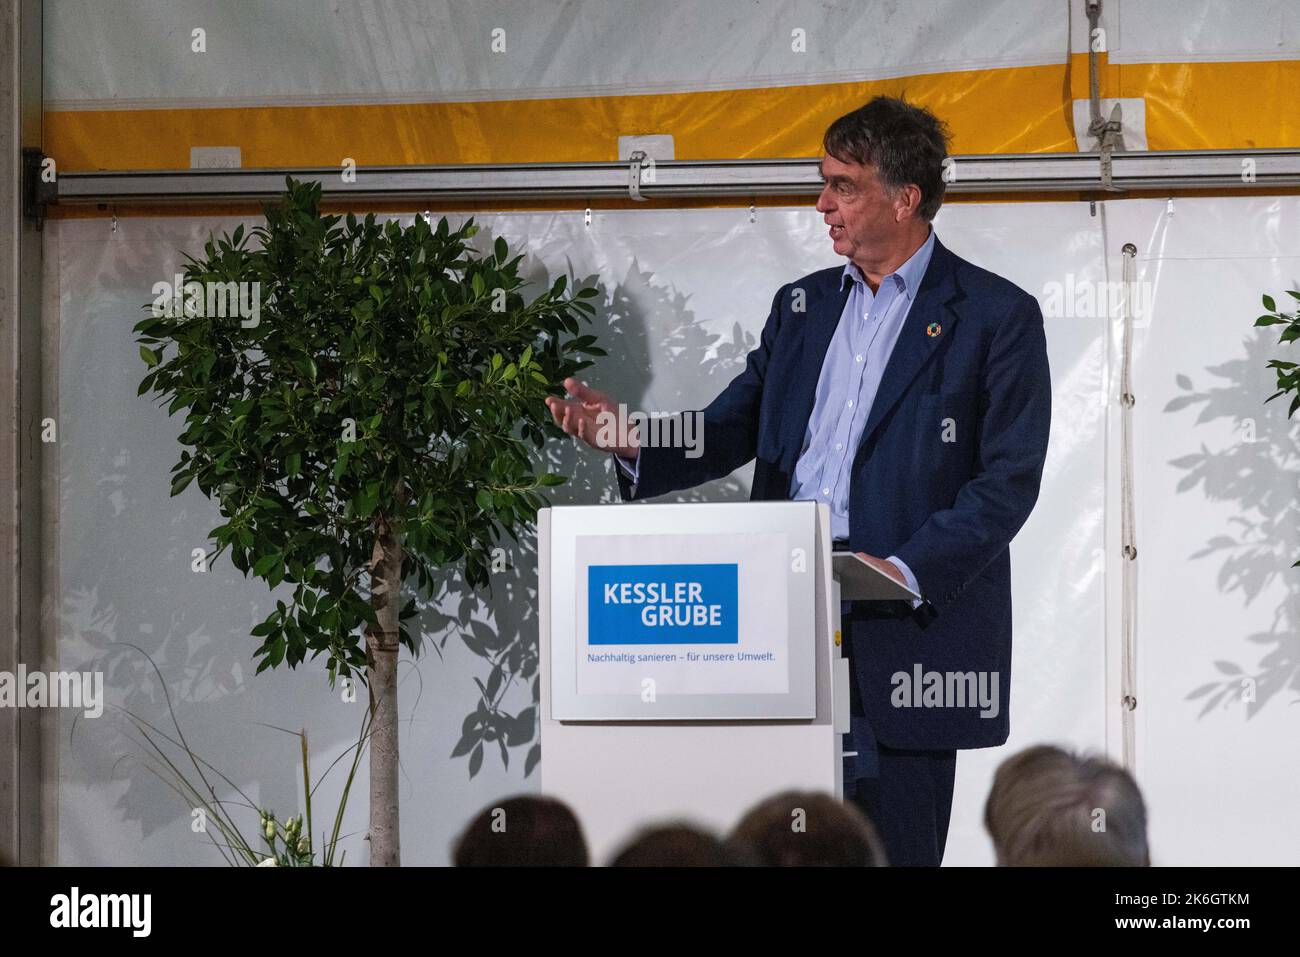 Grenzach Wyhlen, Germany. 14th Oct, 2022. André Hoffmann, Vice Chairman of the Board of Roche Holding AG and great-grandson of company founder Fritz Hoffmann-La Roche, speaks during an event on the remediation of the Kesslergrube. For more than two decades, the so-called Kesslergrube served as a landfill for Grenzach-Wyhlen. The pharmaceutical company Roche also left waste here. Ten years after it began, Roche is now celebrating the completion of the extensive remediation work. Credit: Philipp von Ditfurth/dpa/Alamy Live News Stock Photo